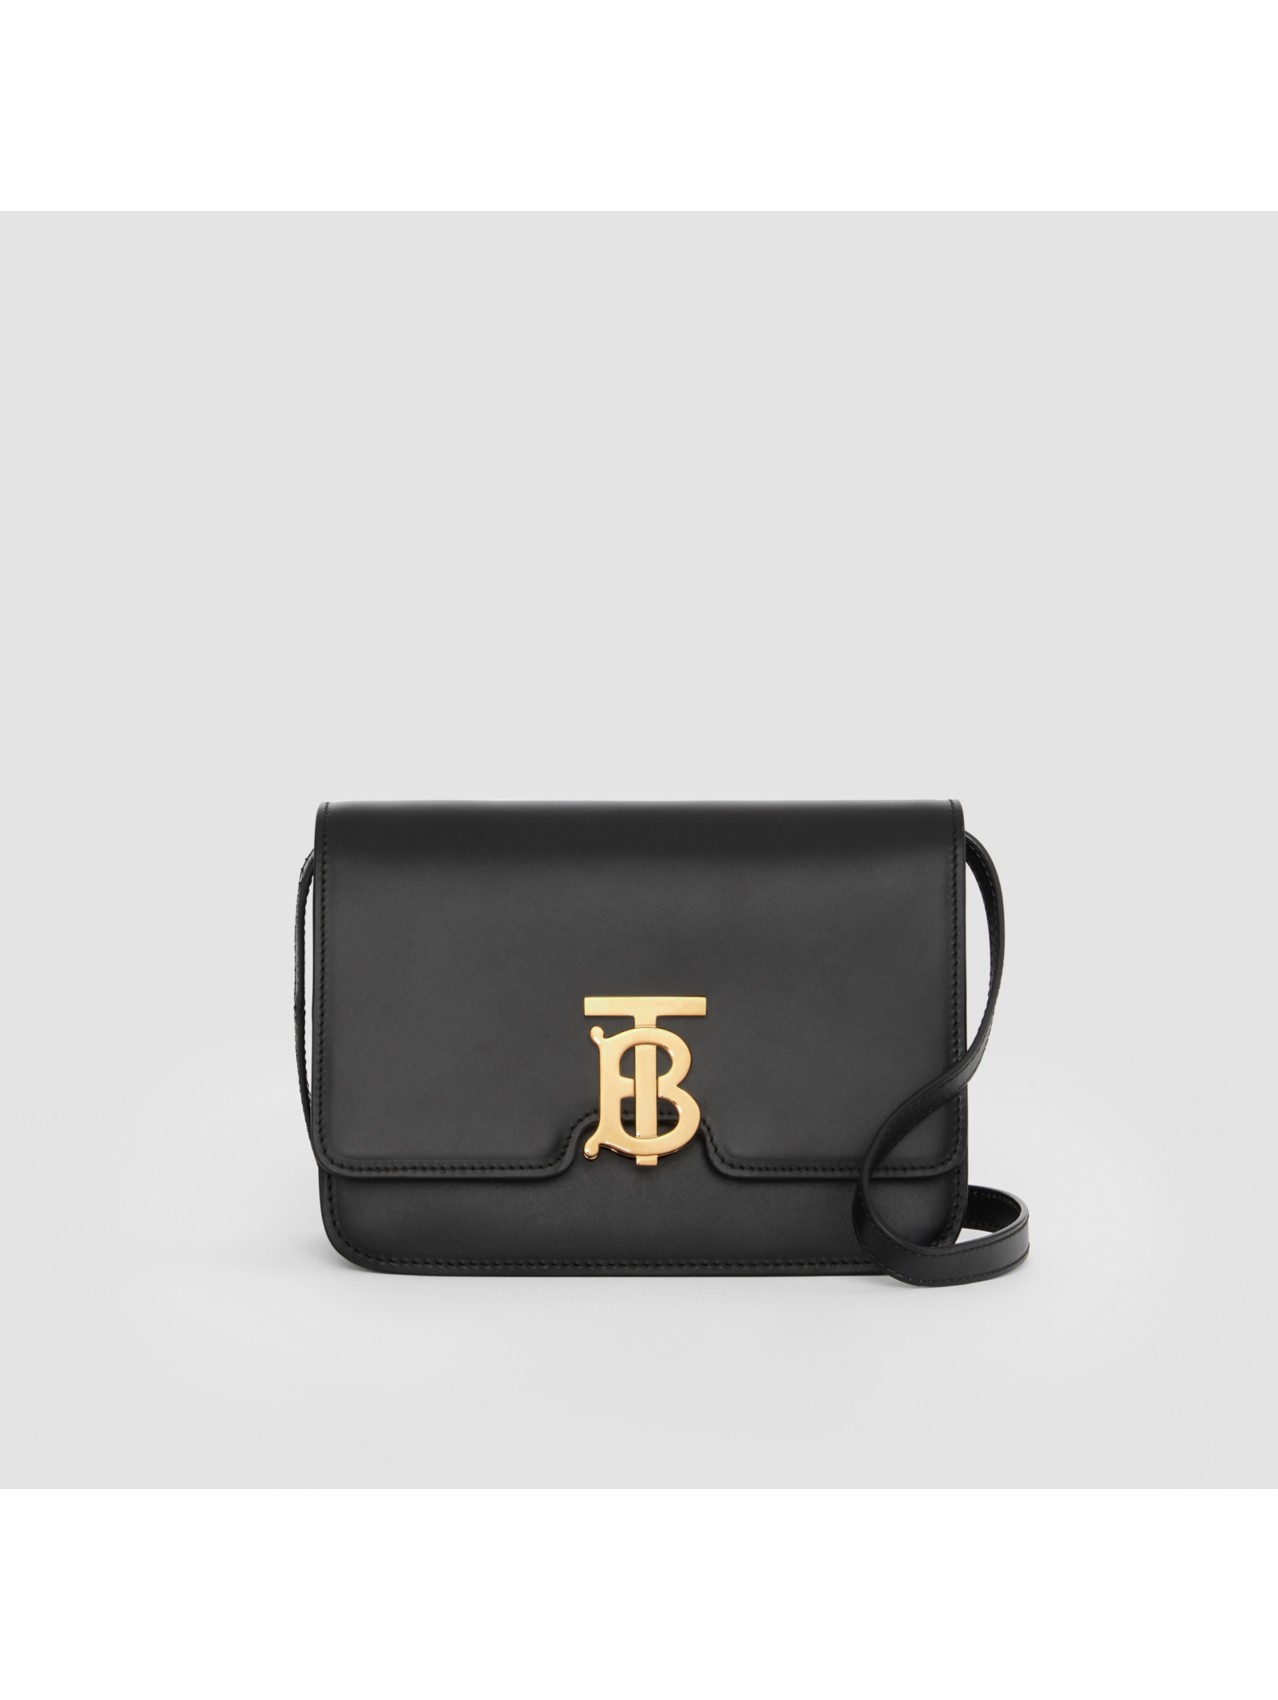 Women’s Bags | Check & Leather Bags for Women | Burberry® Official